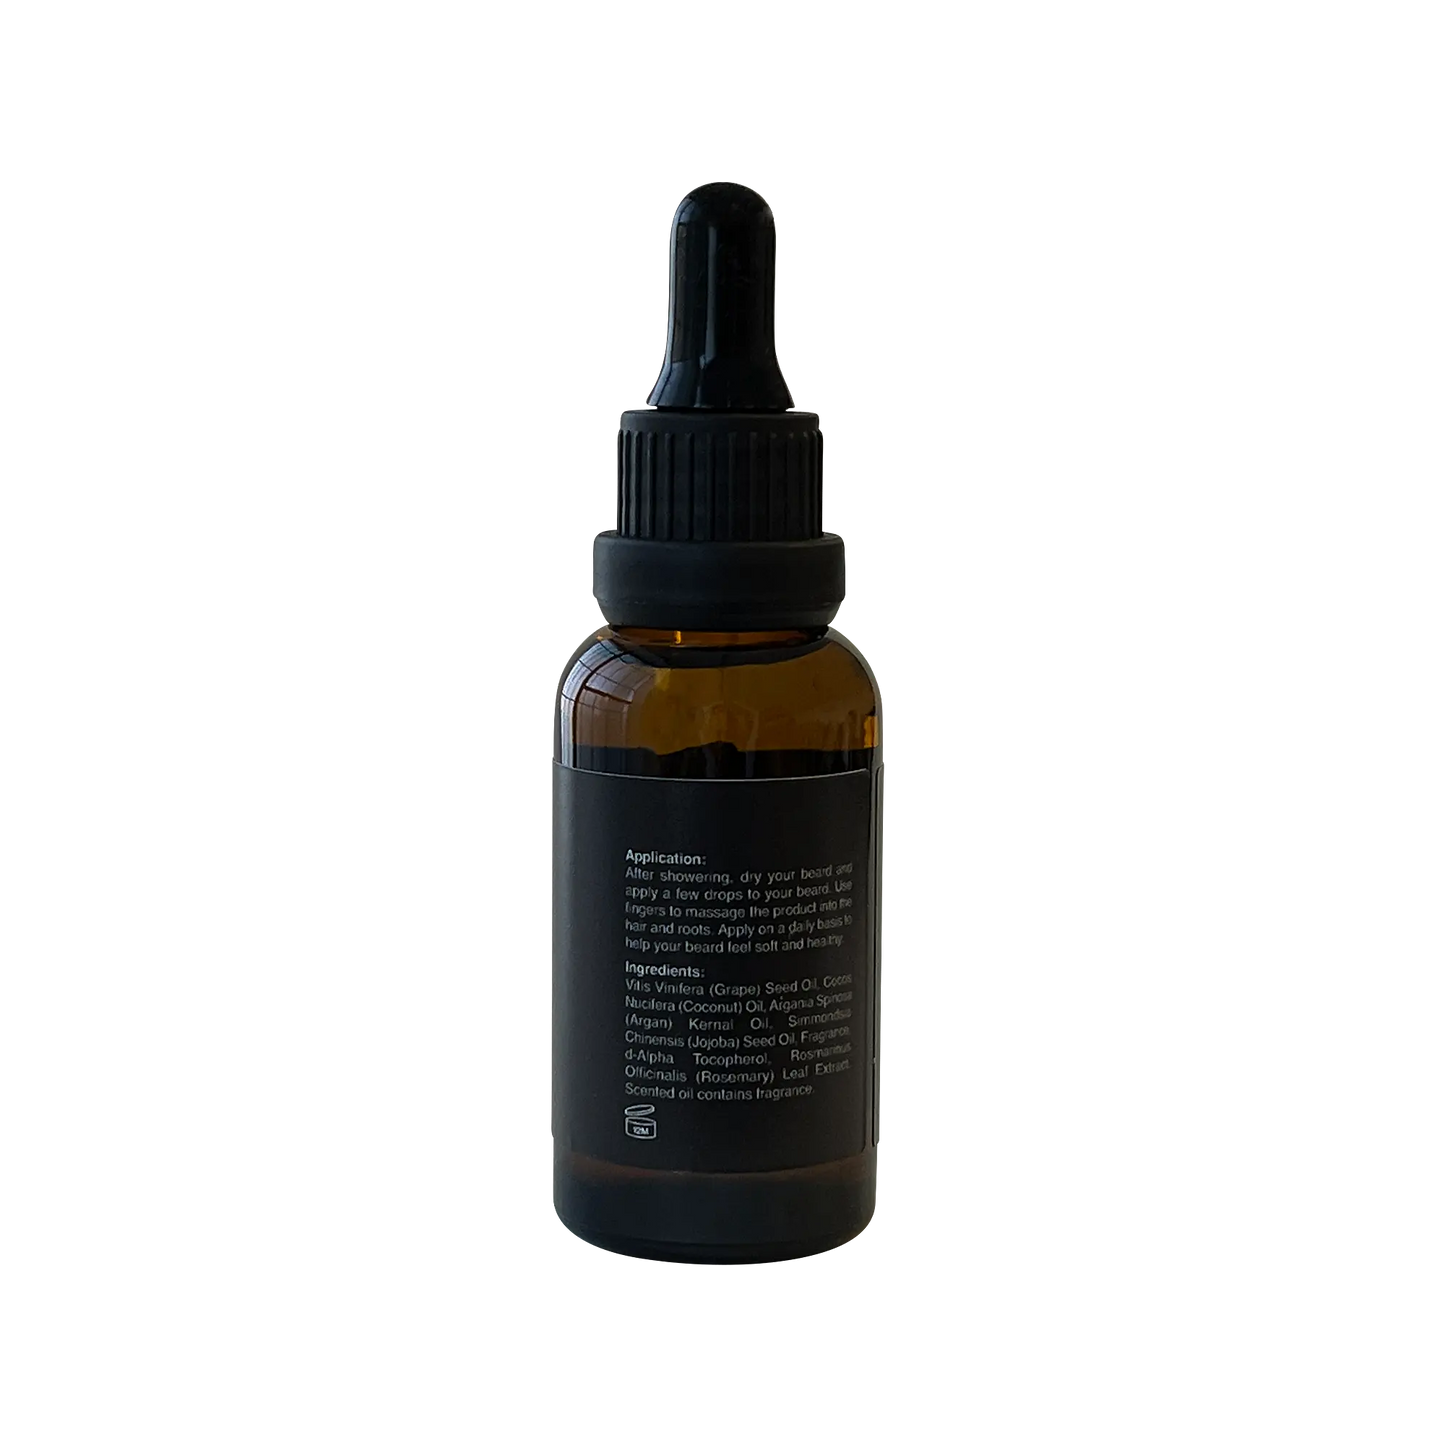 A white background showcases a bottle of Classic Beard Oil, an essential product for grooming and conditioning beards.